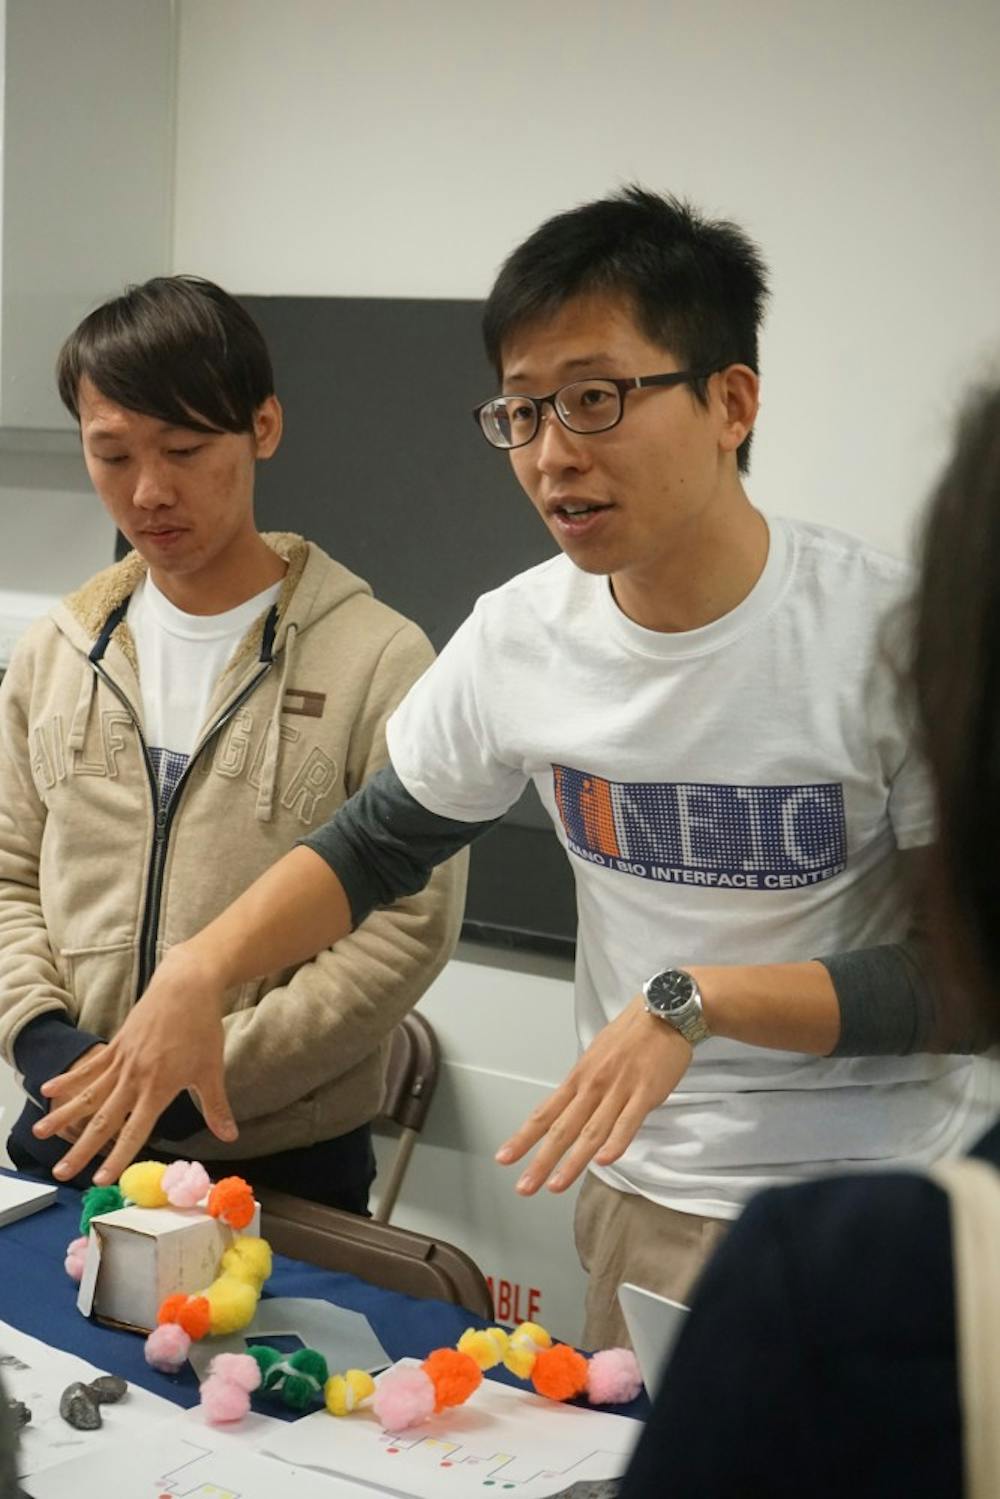 Penn researcher Francis Chen (right) demostrated the properties of a graphene to high school students in Singh Center during the NanoDays festival last week.